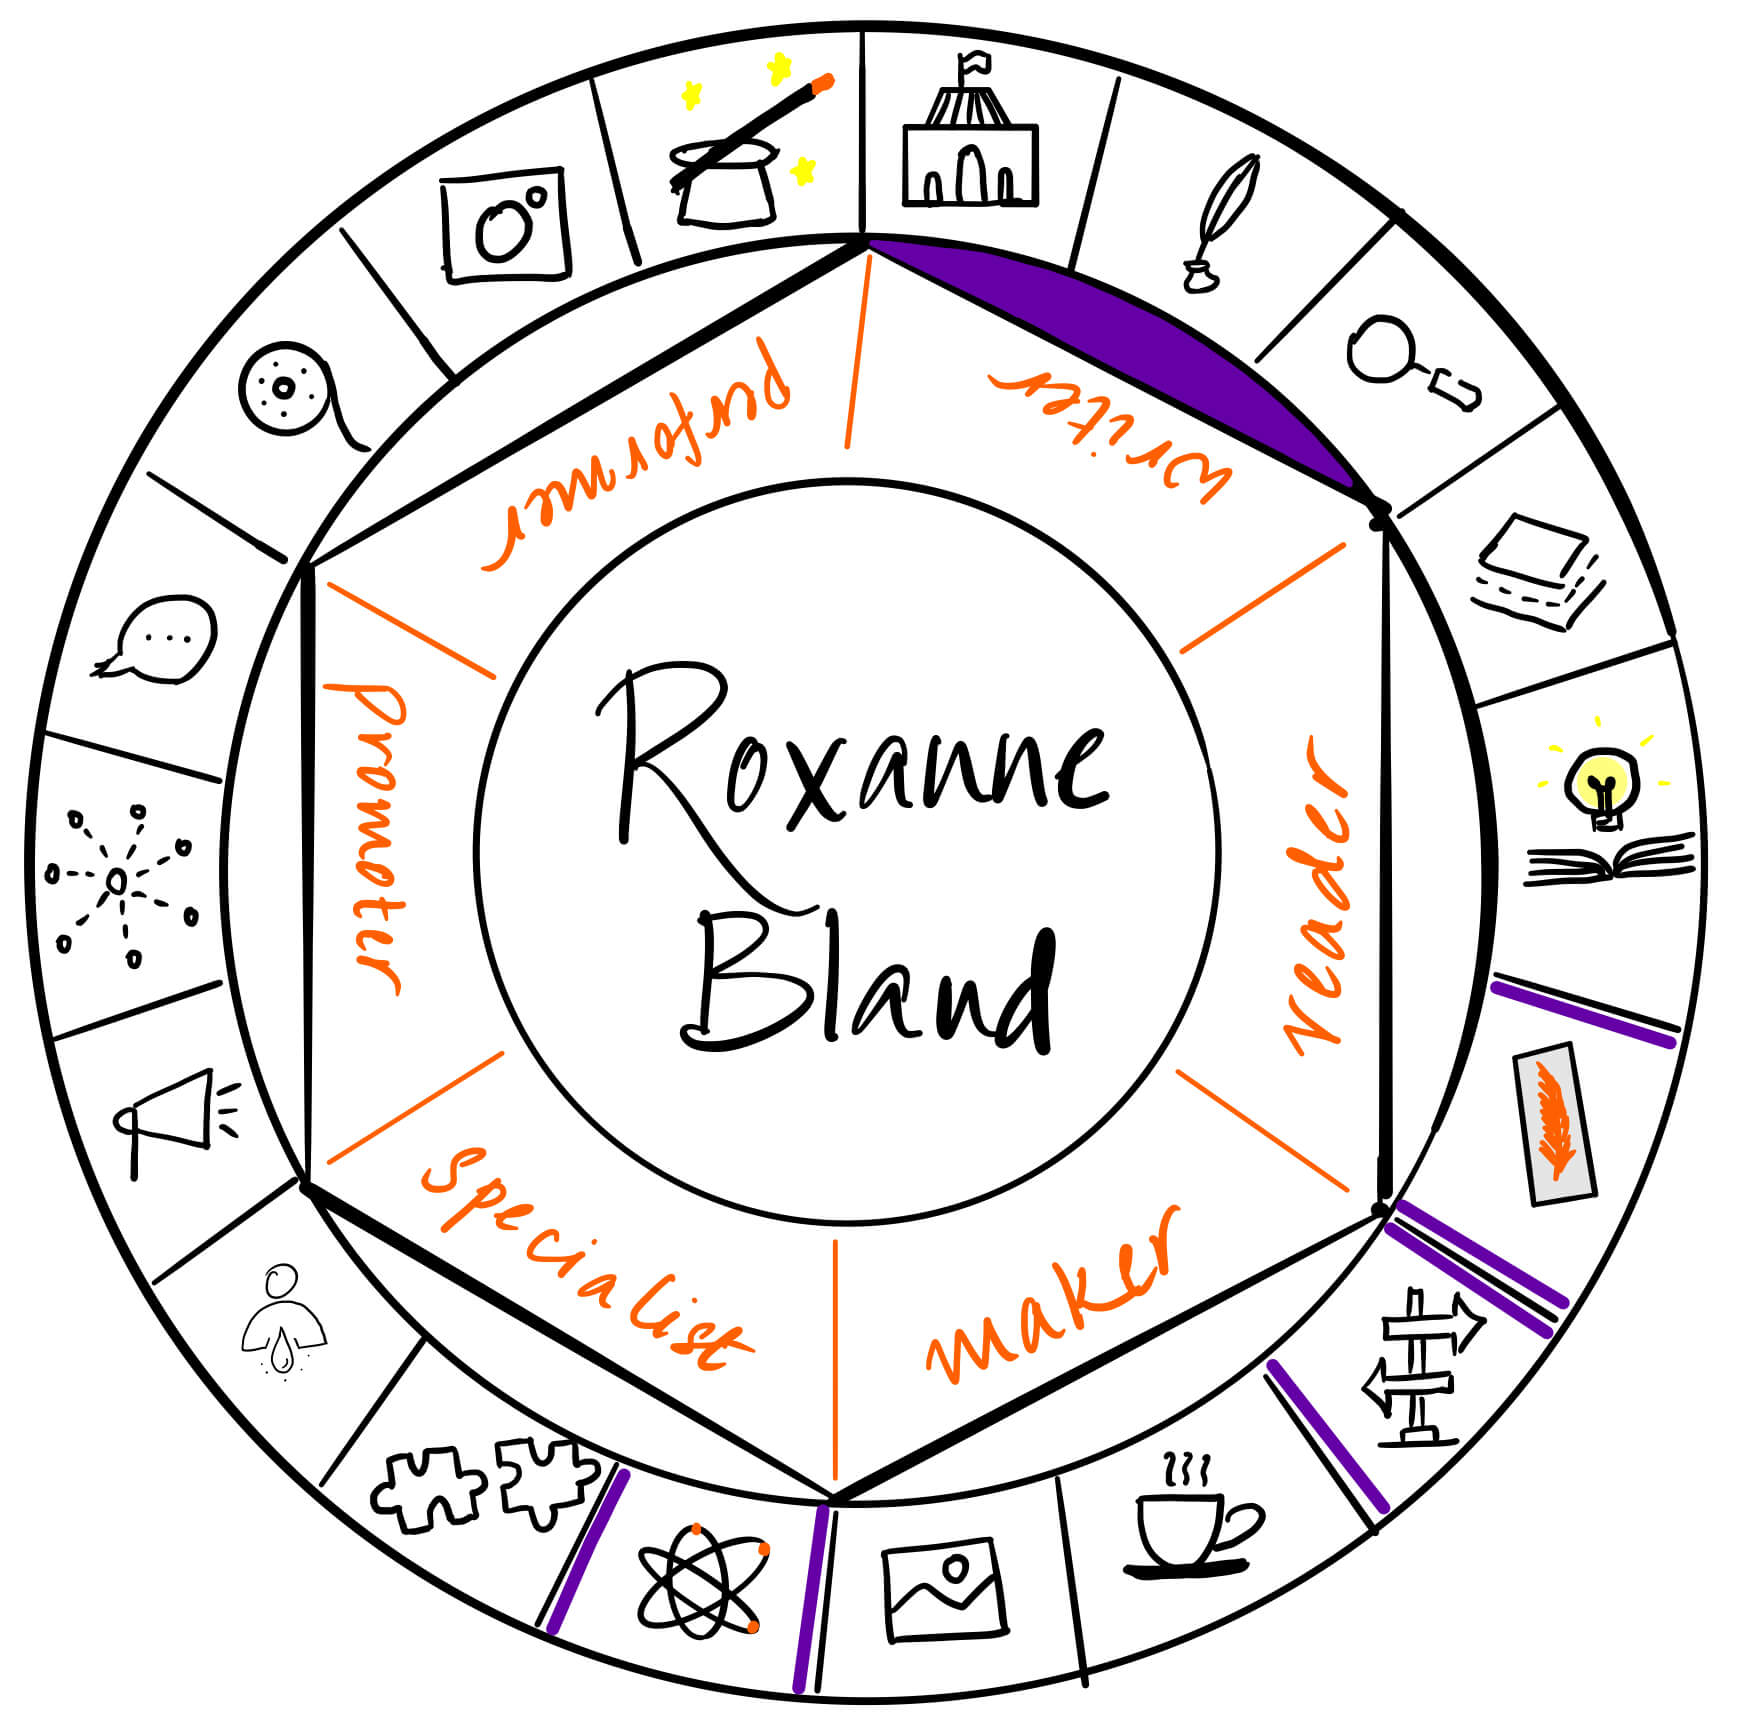 Roxanne Bland is a writer. It's a pleasure to have her over on The Creator's Roulette to talk about rooting science fiction in reality.